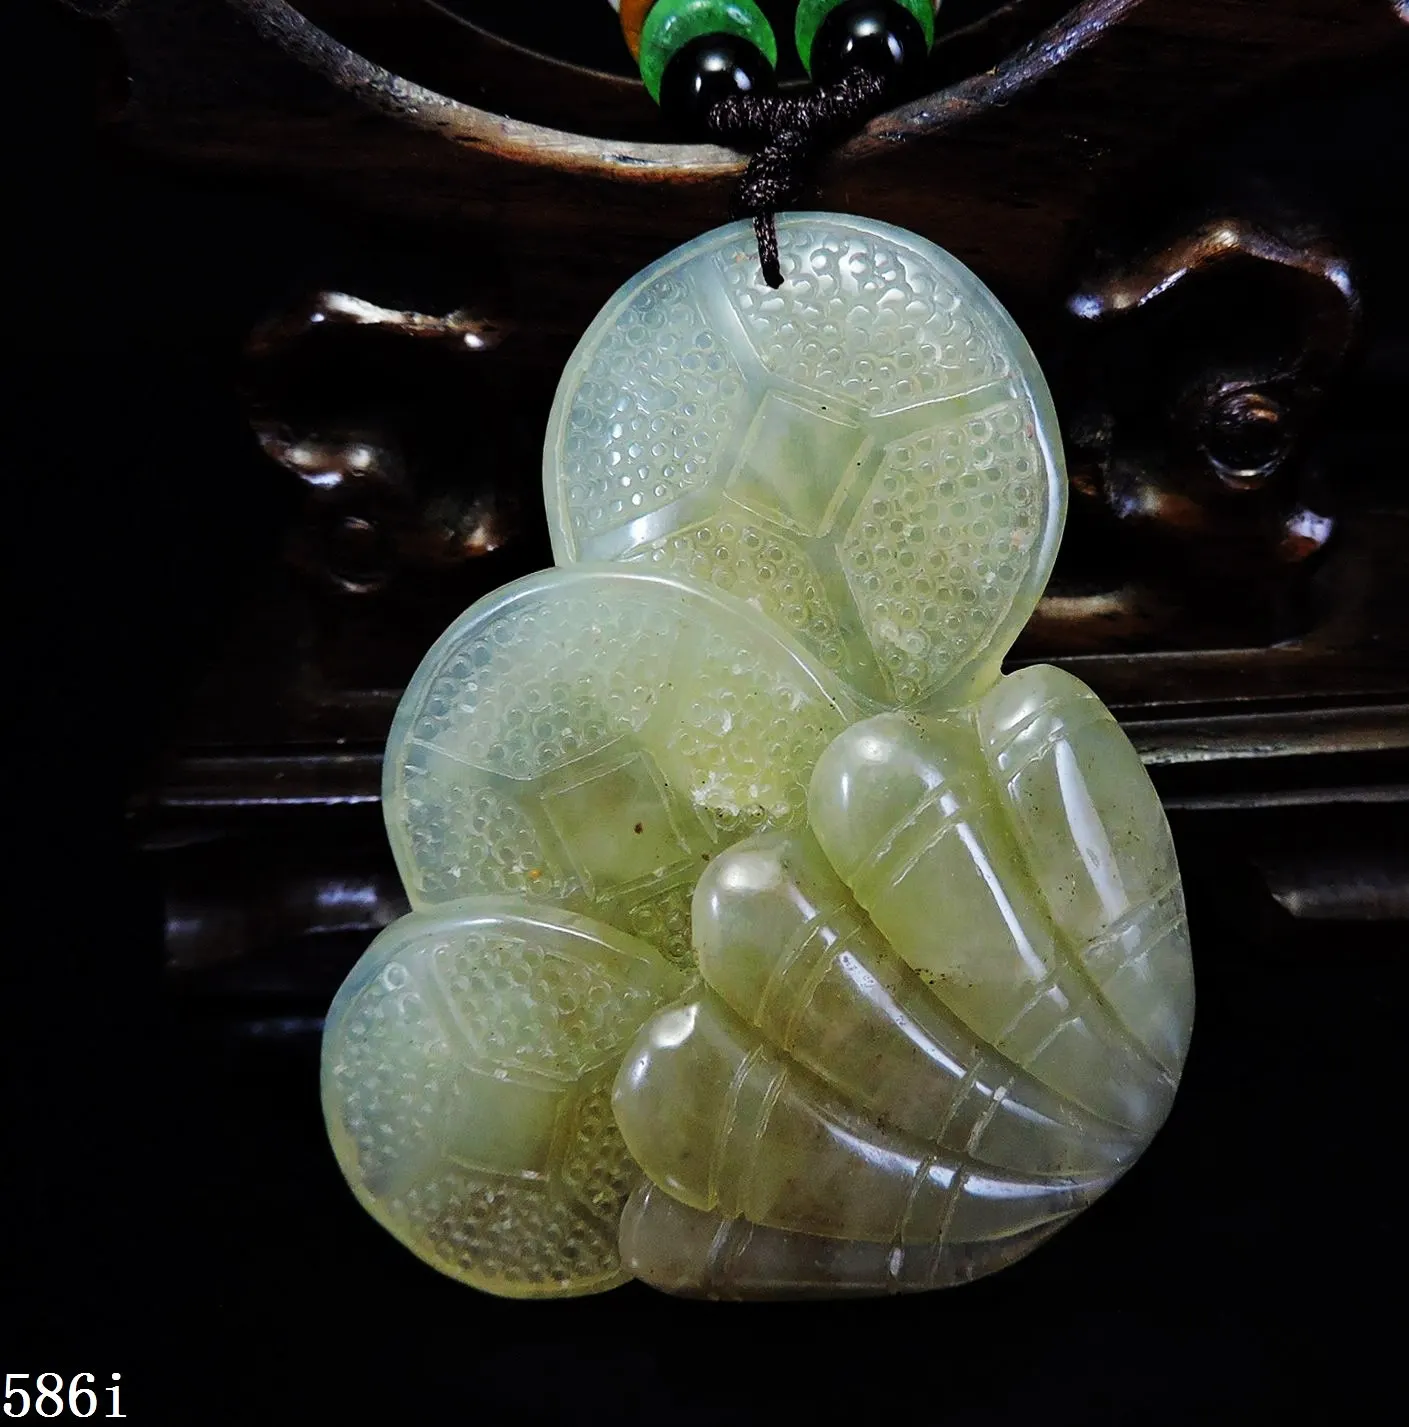 

Jade Jewelry Natural Jade Pendant Necklace Hand-Carved seashell&coin Jadeite Necklace Pendant Gift No Treatment 586i